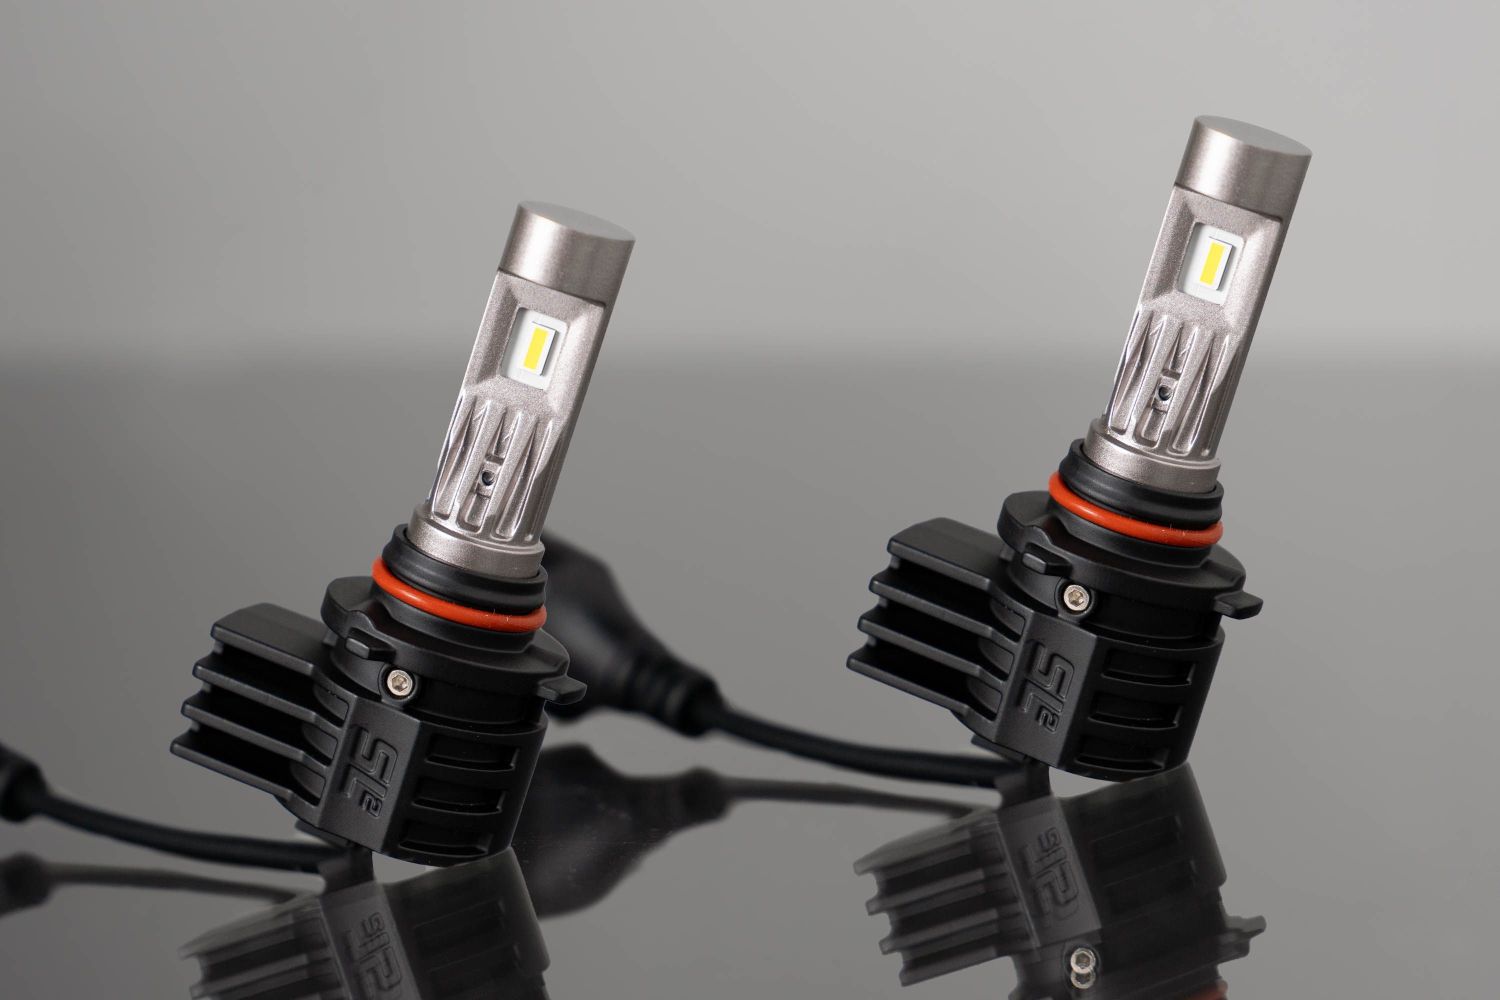 SL2 Pro LED Replacement Bulbs